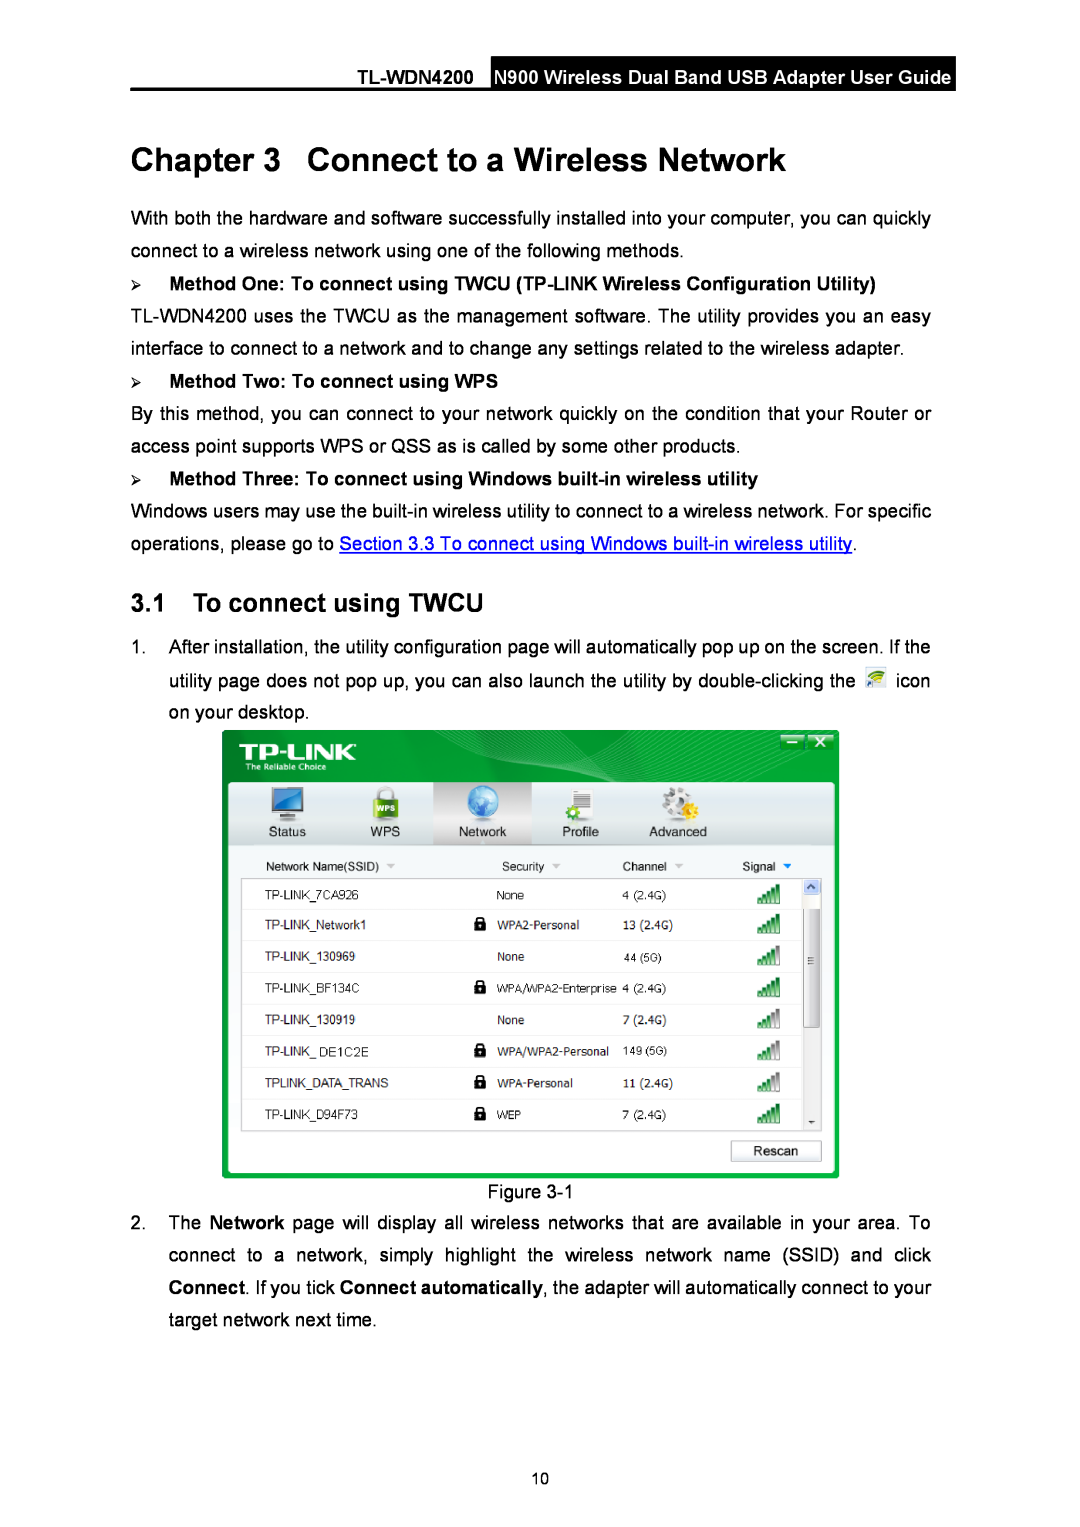 TP-Link TL-WDN4200 manual Connect to a Wireless Network, To connect using TWCU, ¾ Method Two To connect using WPS 